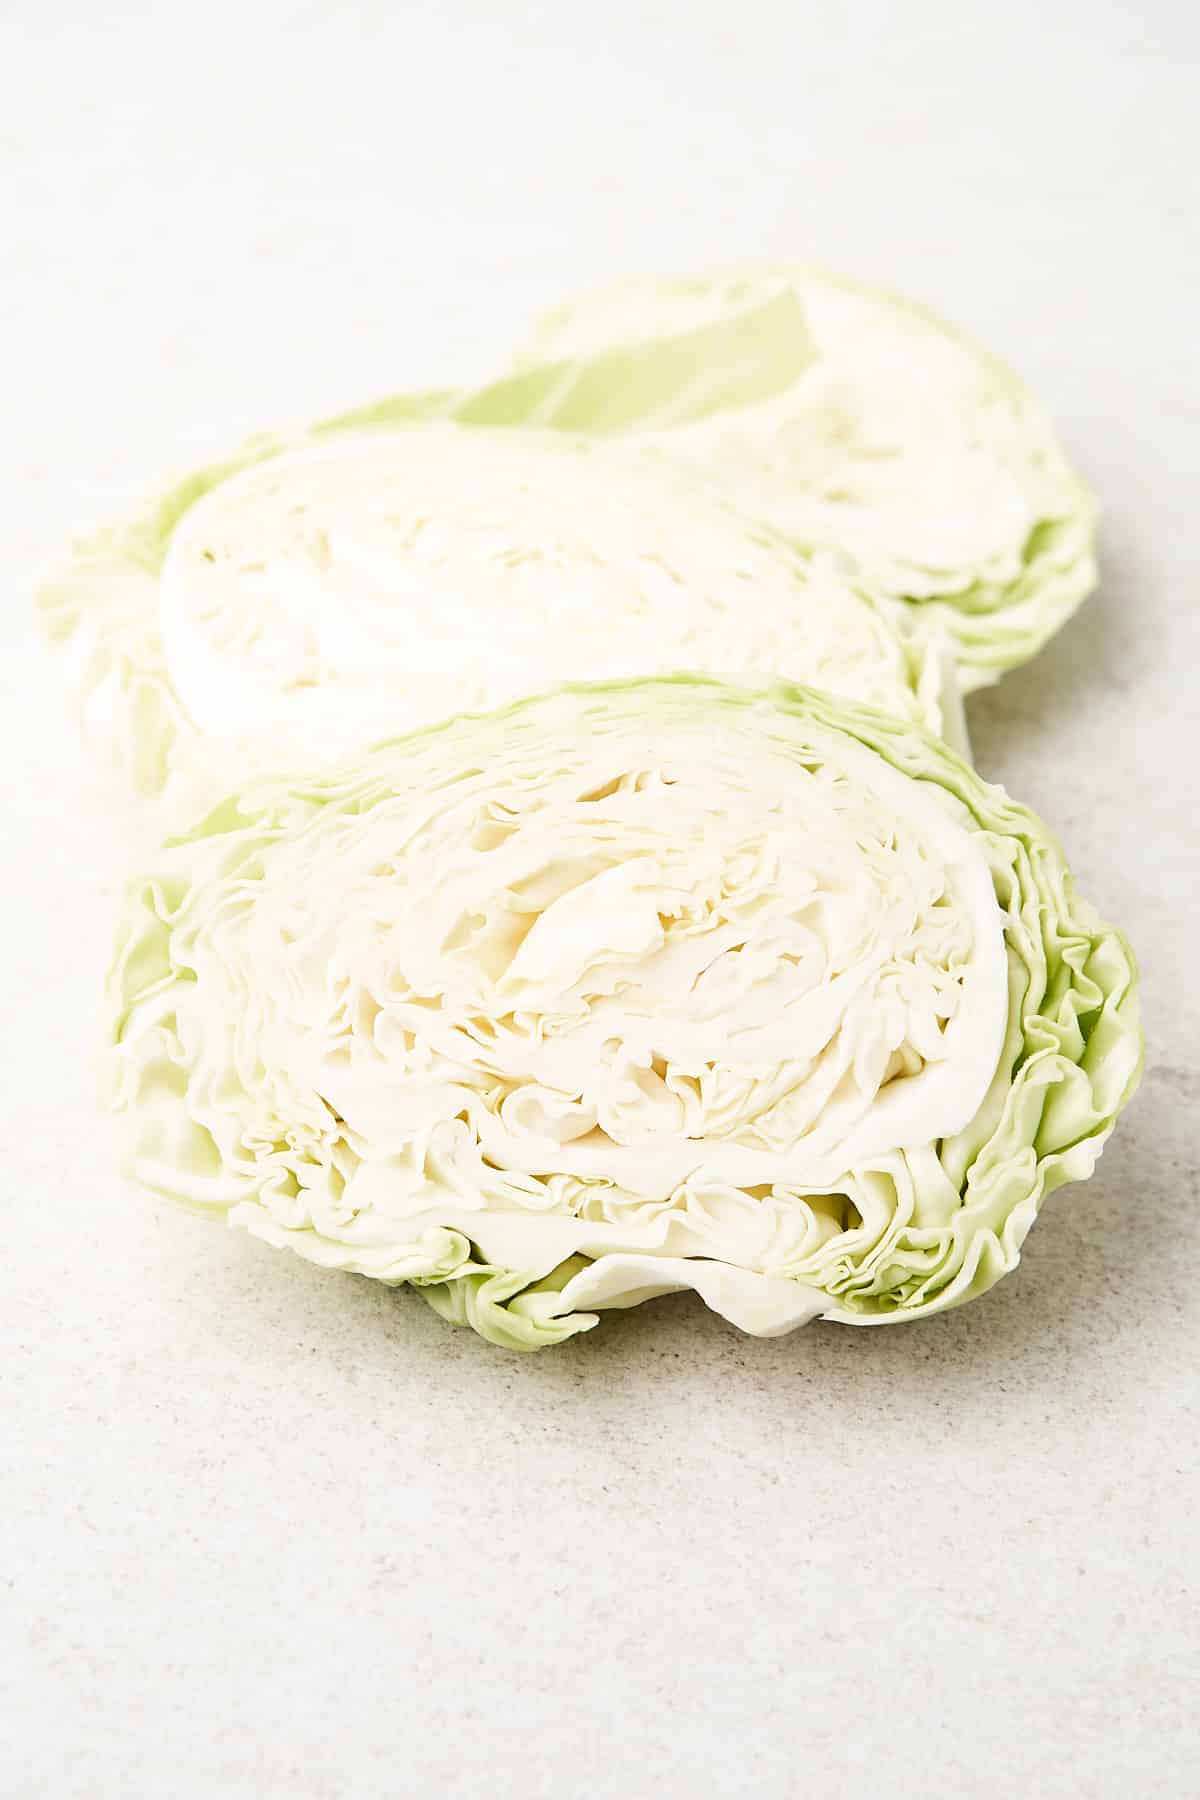 Cabbage steaks on a table.